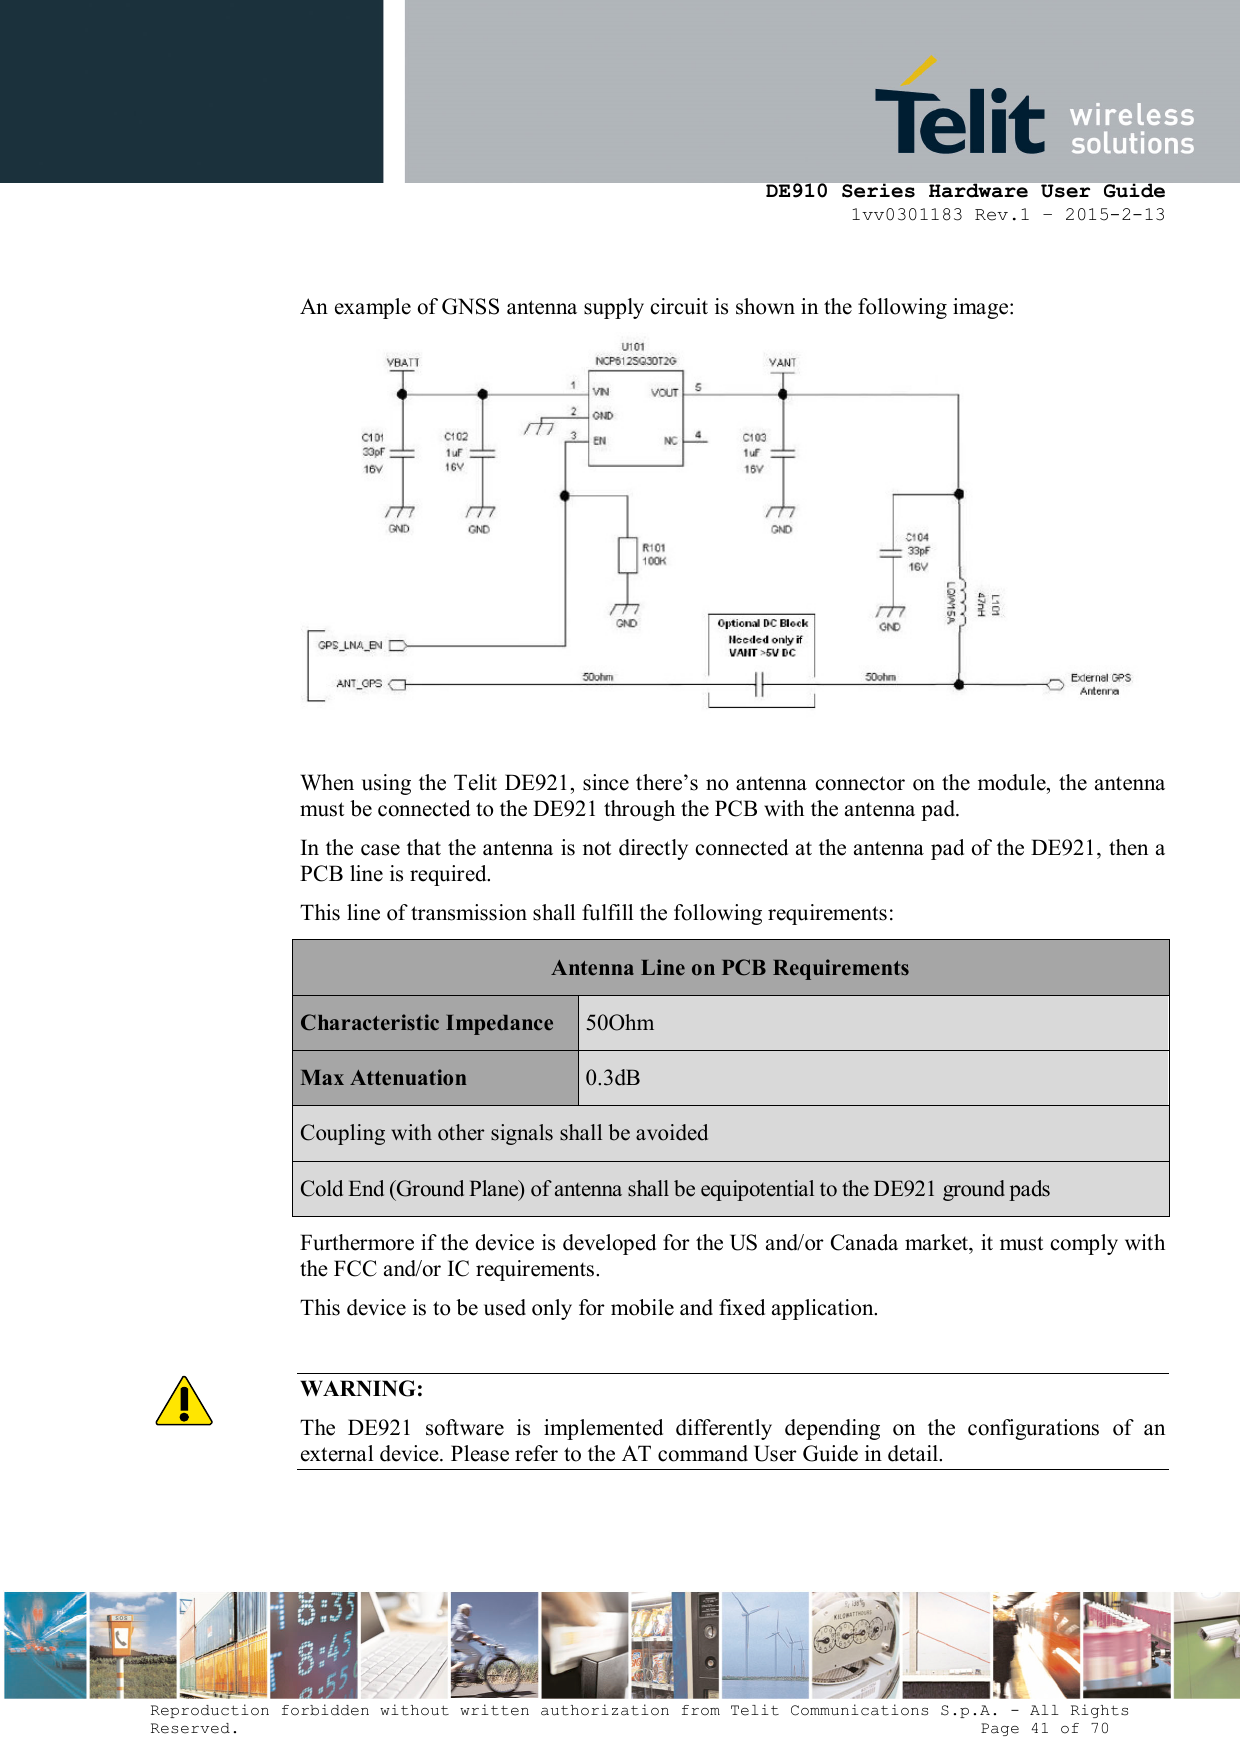      DE910 Series Hardware User Guide 1vv0301183 Rev.1 – 2015-2-13 Reproduction forbidden without written authorization from Telit Communications S.p.A. - All Rights Reserved.                                                                          Page 41 of 70  An example of GNSS antenna supply circuit is shown in the following image:   When using the Telit DE921, since there’s no antenna connector on the module, the antenna must be connected to the DE921 through the PCB with the antenna pad.  In the case that the antenna is not directly connected at the antenna pad of the DE921, then a PCB line is required. This line of transmission shall fulfill the following requirements: Antenna Line on PCB Requirements Characteristic Impedance  50Ohm Max Attenuation  0.3dB Coupling with other signals shall be avoided Cold End (Ground Plane) of antenna shall be equipotential to the DE921 ground pads Furthermore if the device is developed for the US and/or Canada market, it must comply with the FCC and/or IC requirements. This device is to be used only for mobile and fixed application.    WARNING: The  DE921  software  is  implemented  differently  depending  on  the  configurations  of  an external device. Please refer to the AT command User Guide in detail.   